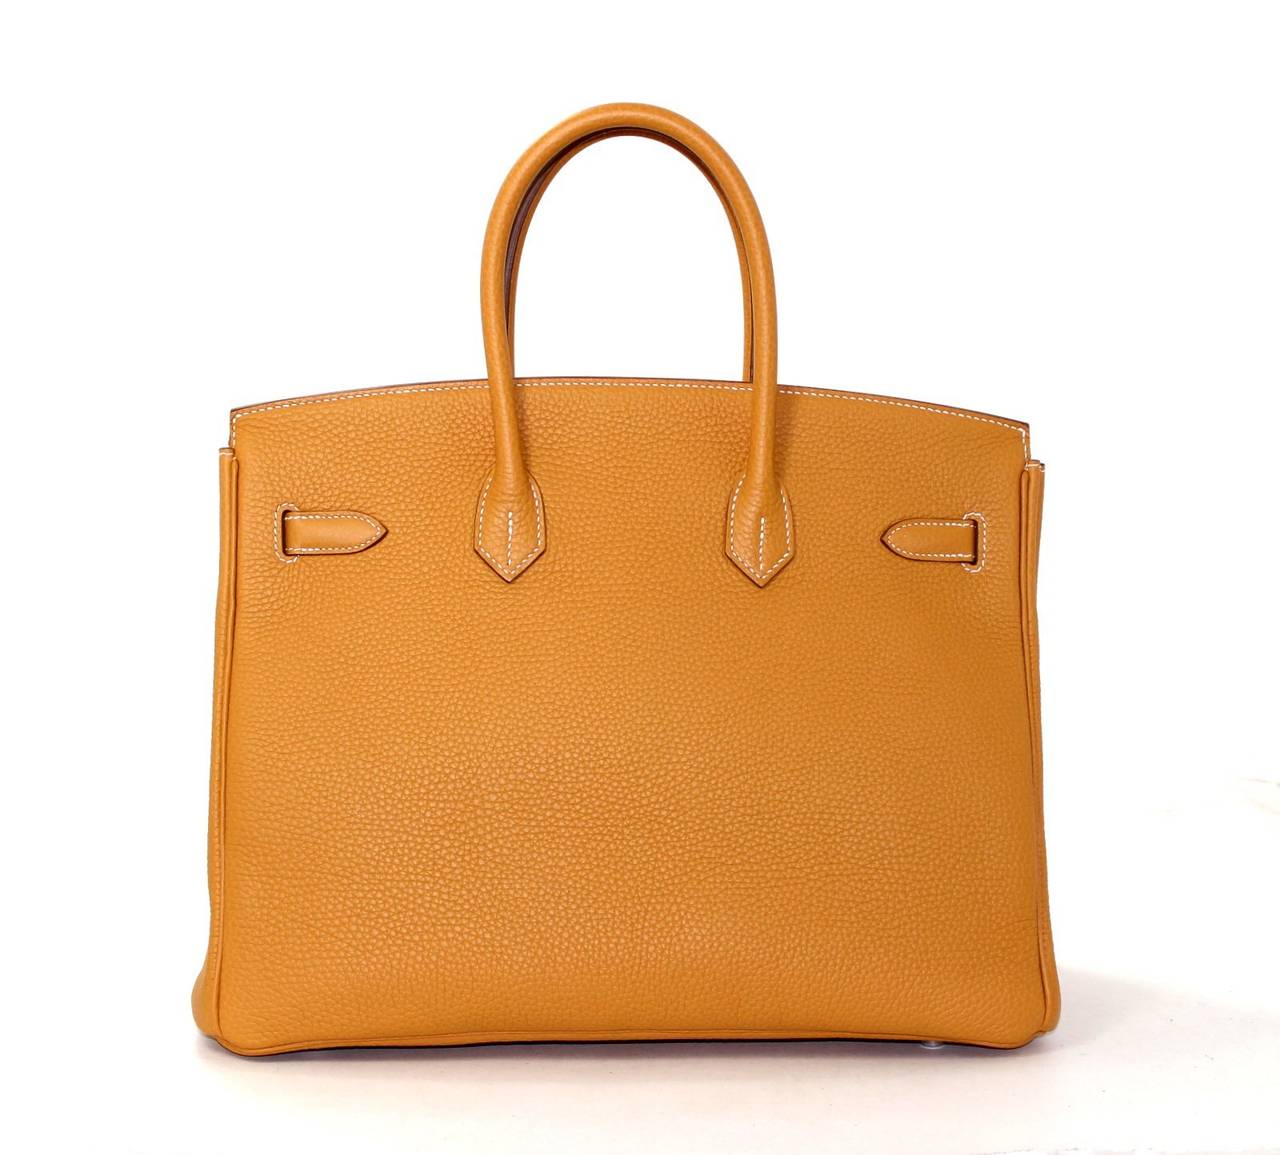 Pristine, store fresh condition (plastic on hardware) Hermès Birkin Bag in Sable Fjord Leather with Palladium, 35 cm size.   Crafted by hand and considered by many as the epitome of luxury items, Birkins are extremely difficult to get. Scratch